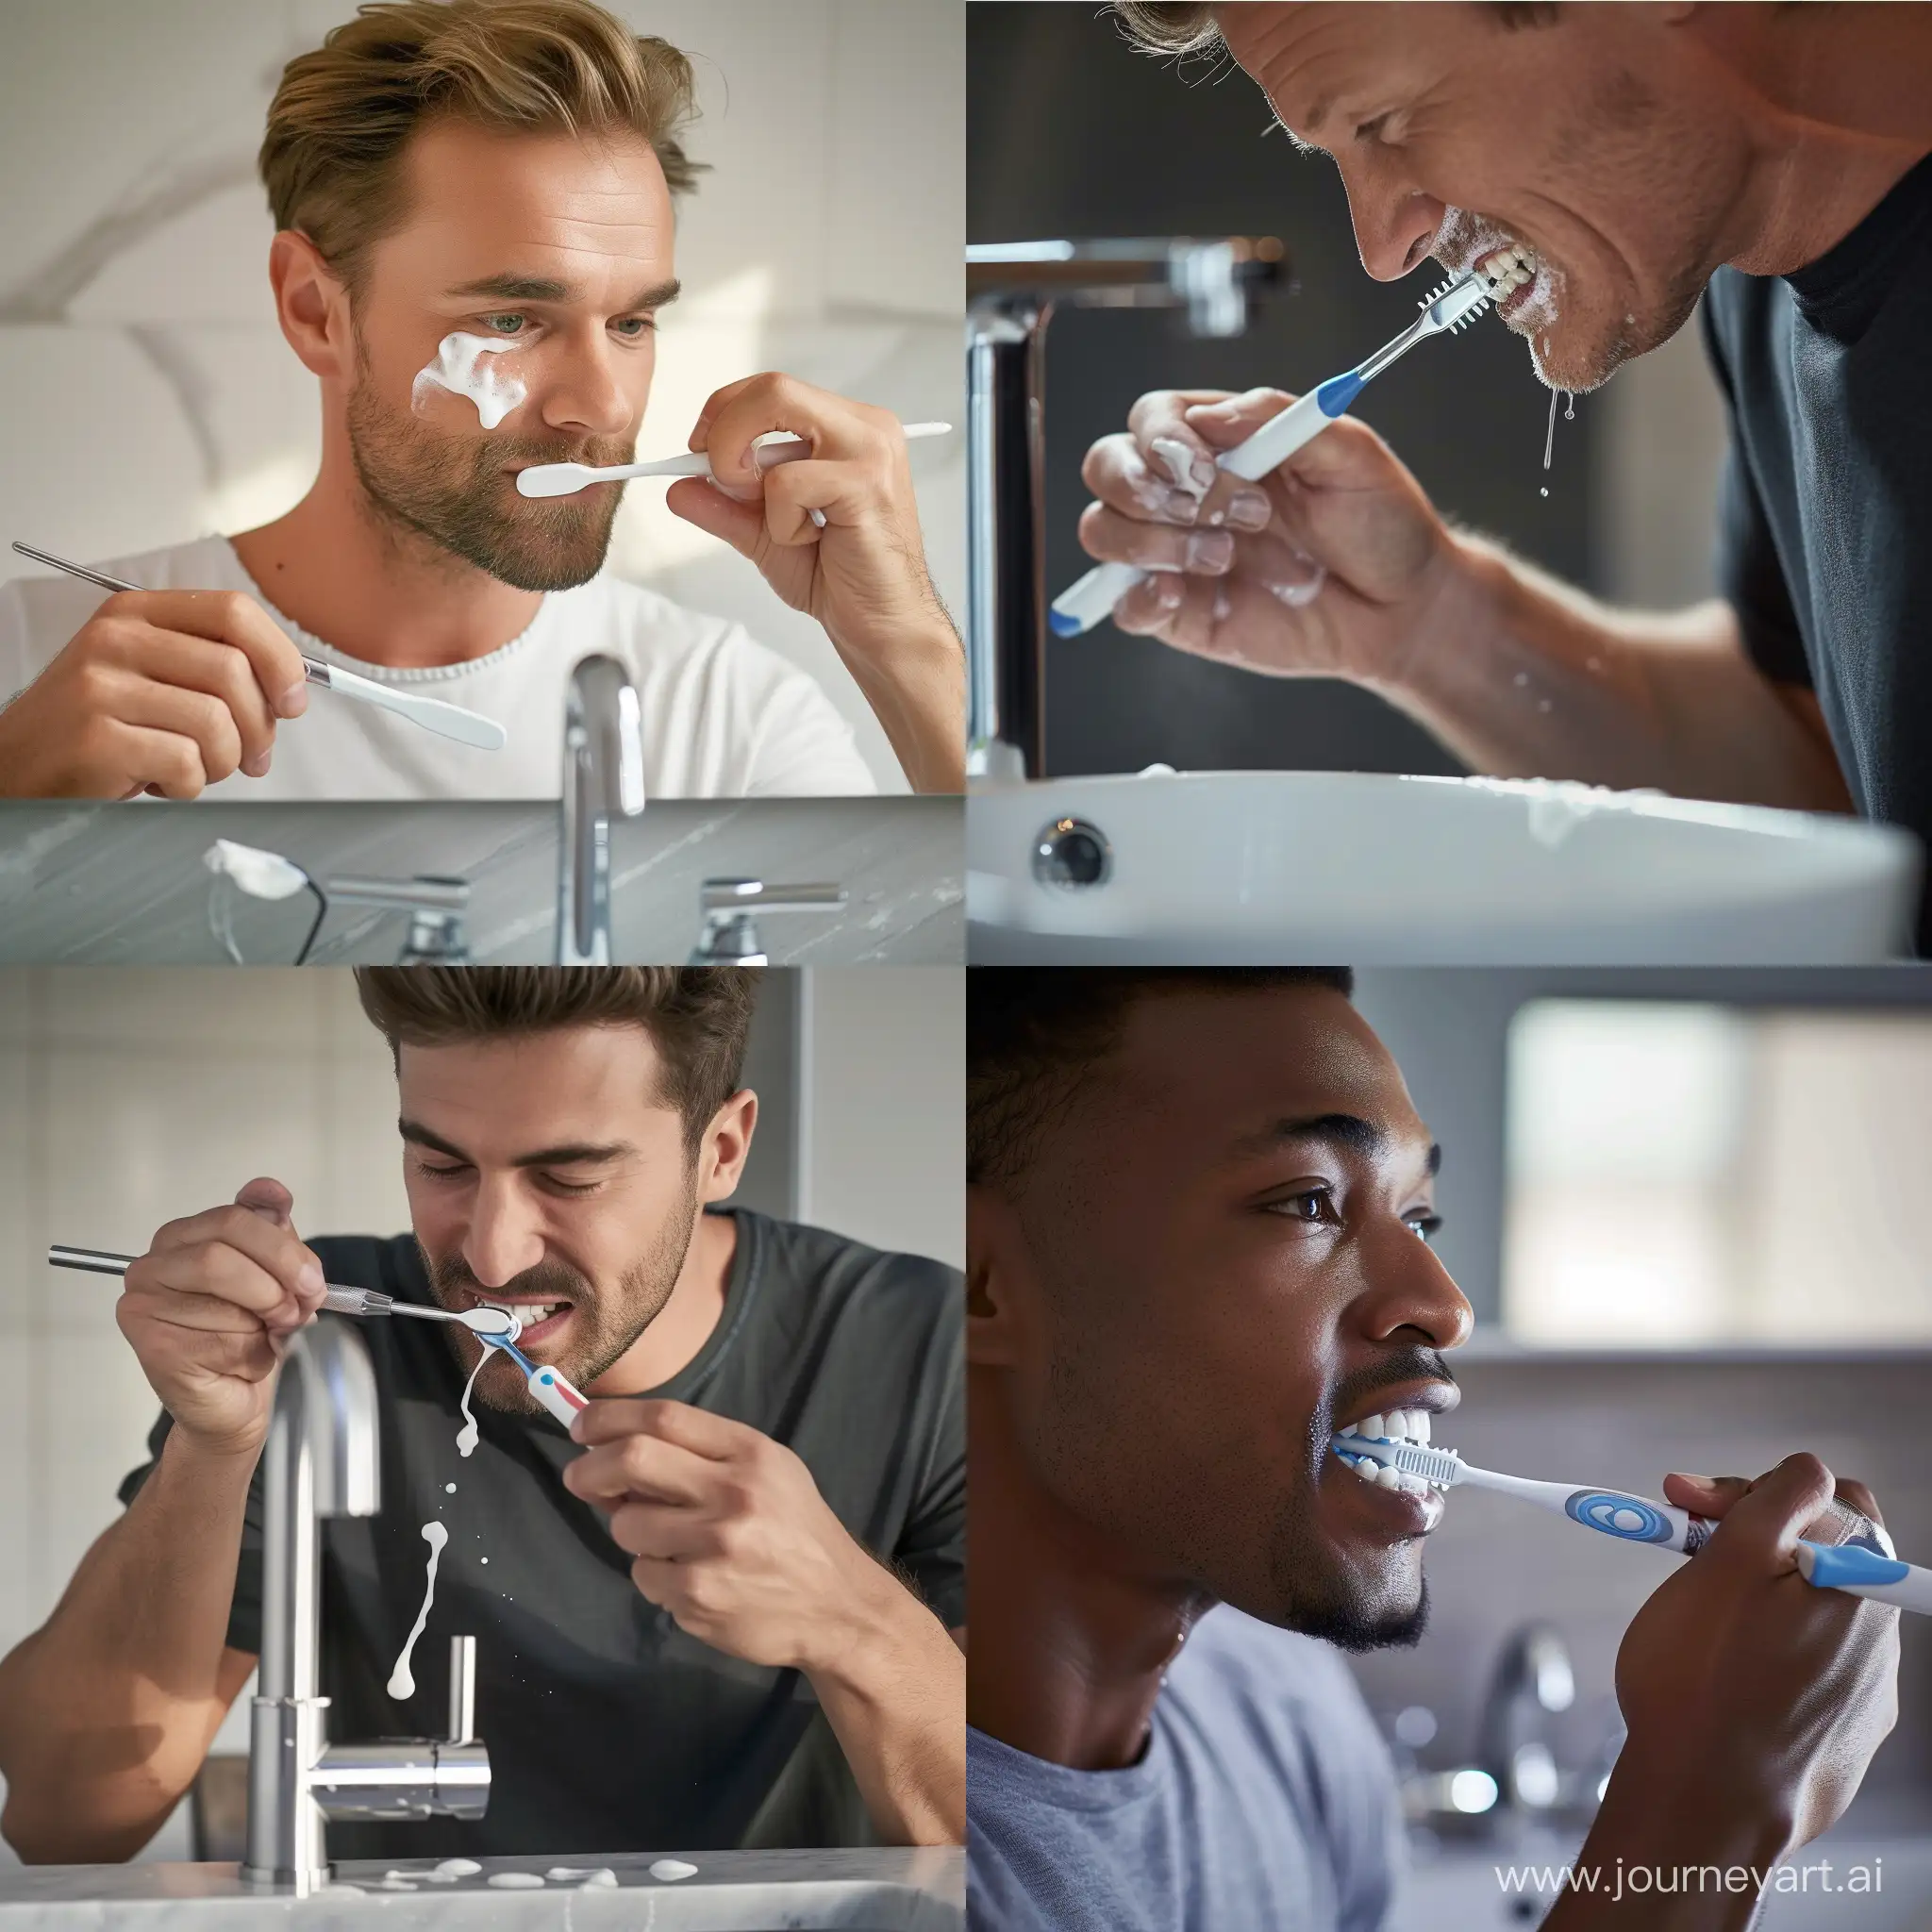 A man is brushing his teeth, with the faucet closed to save water, realistic